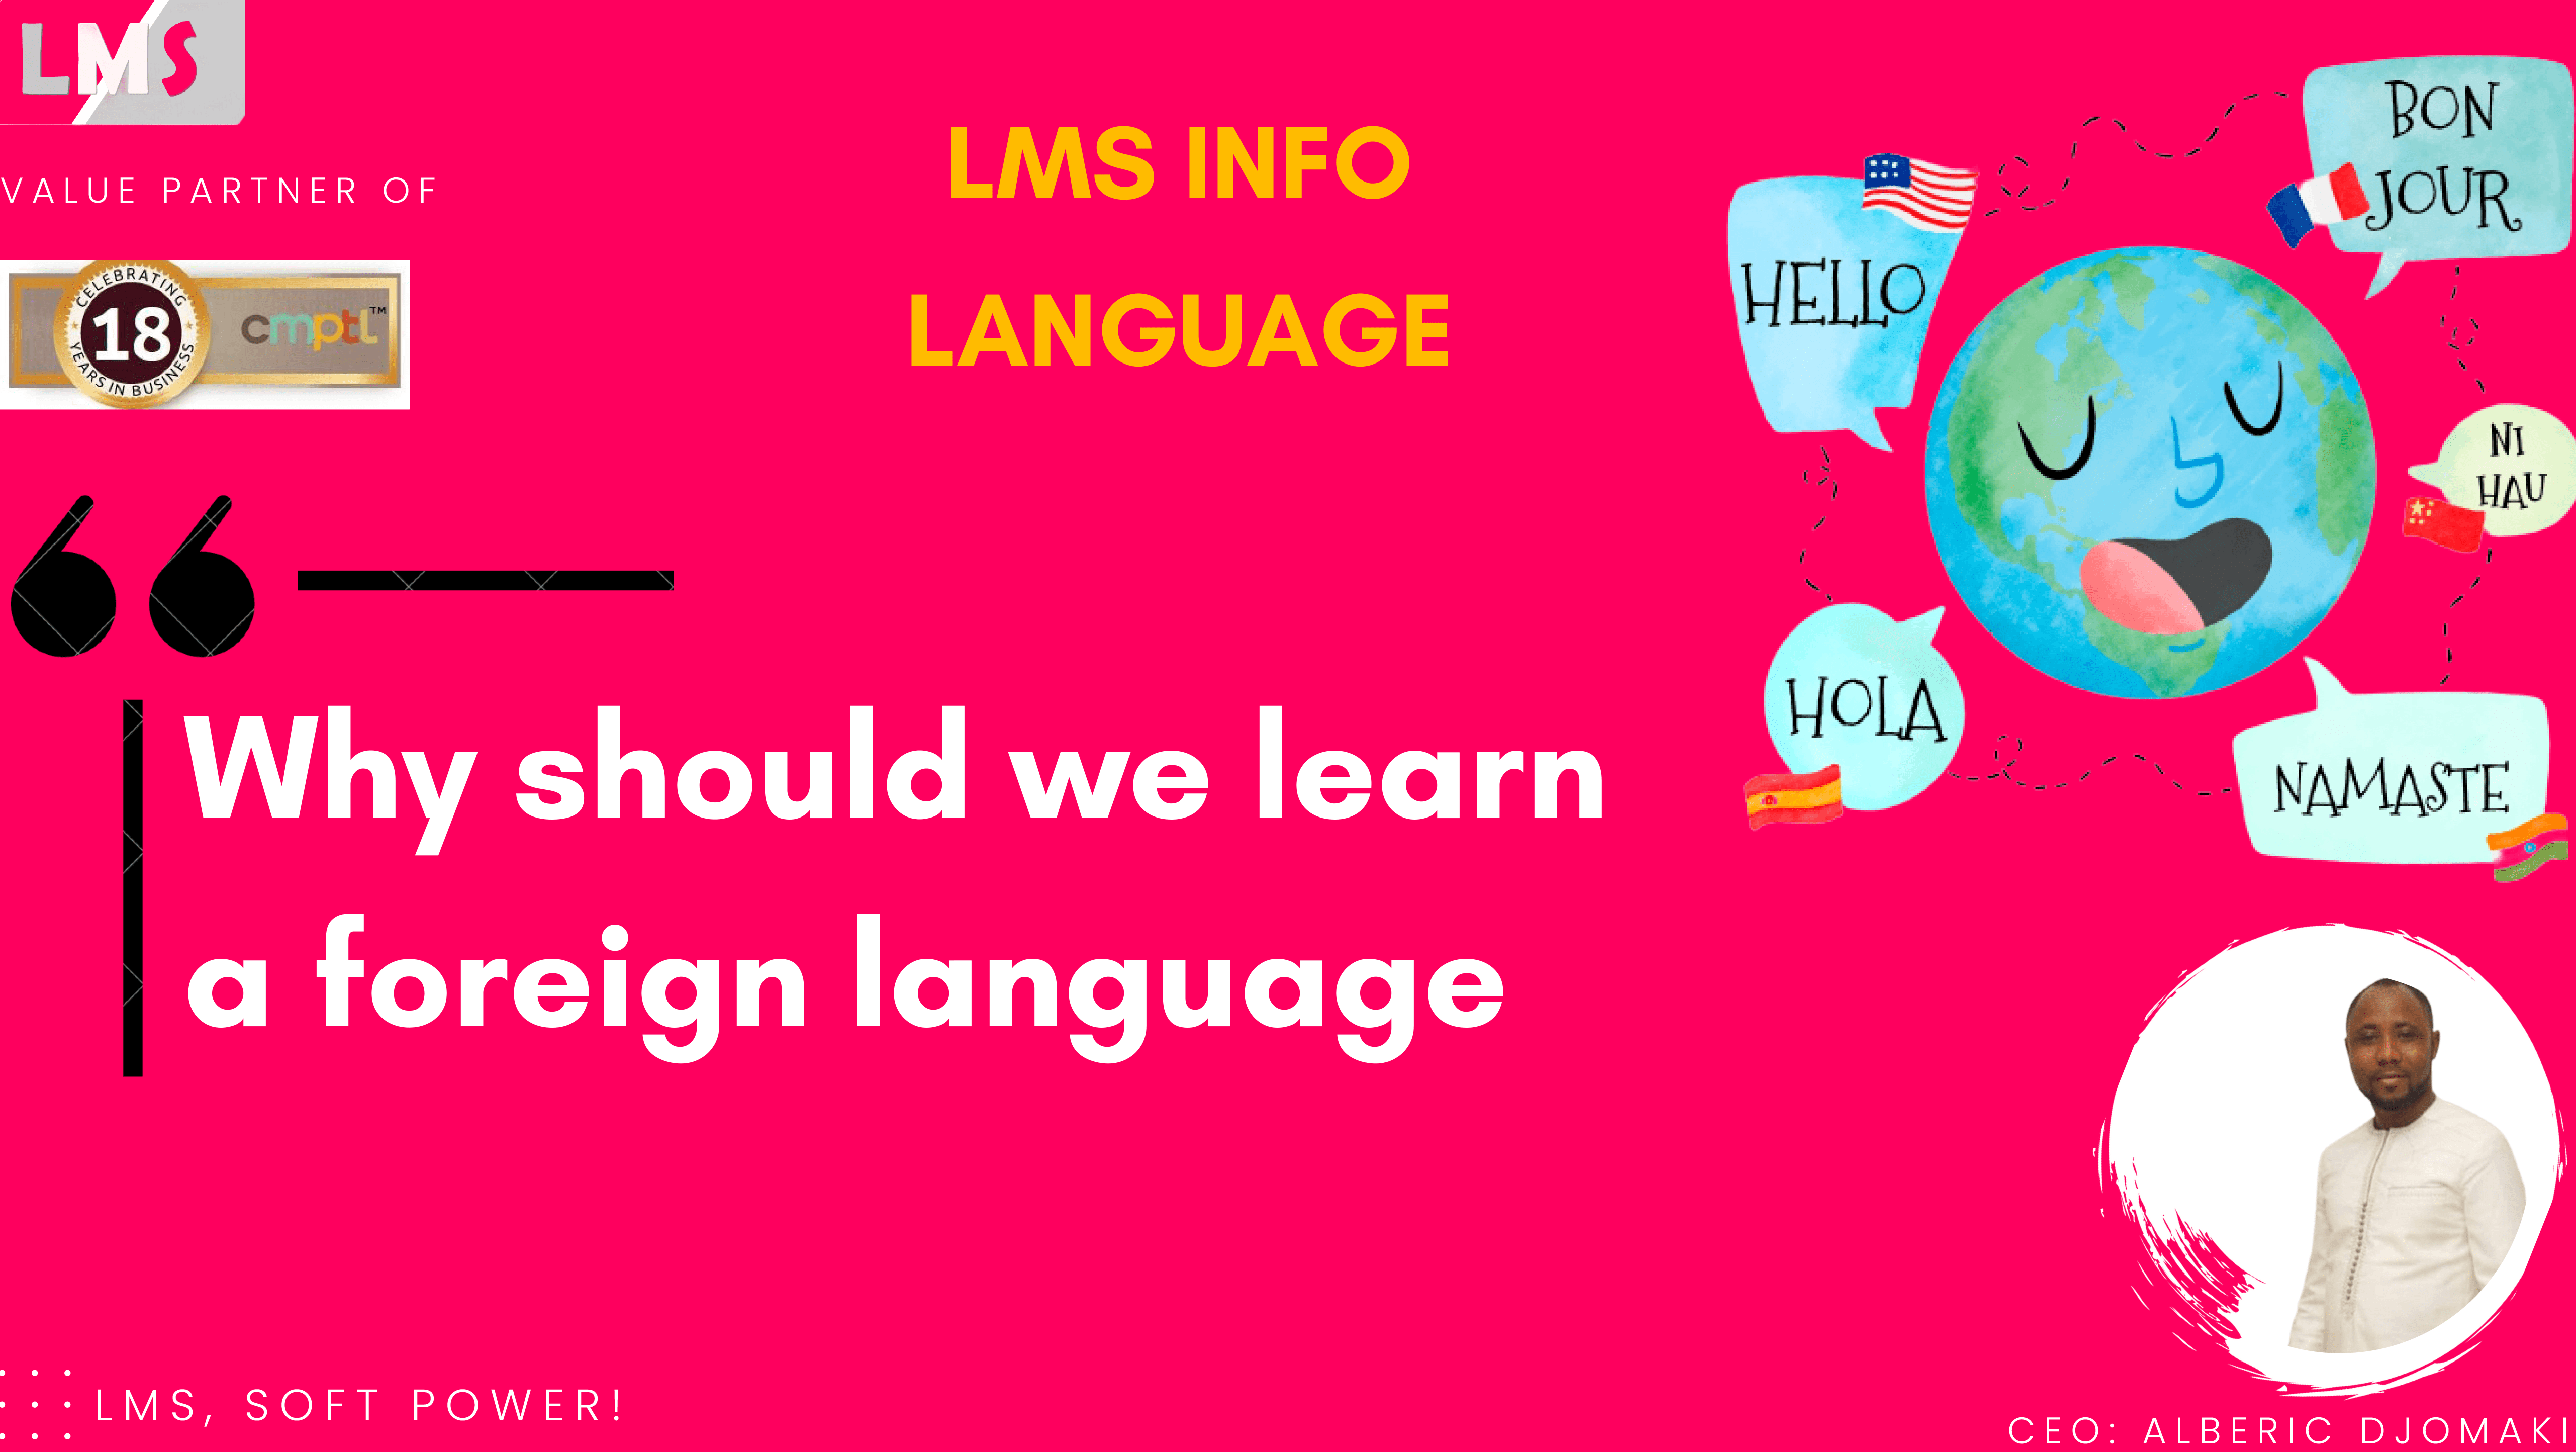 Why should we learn a foreign language